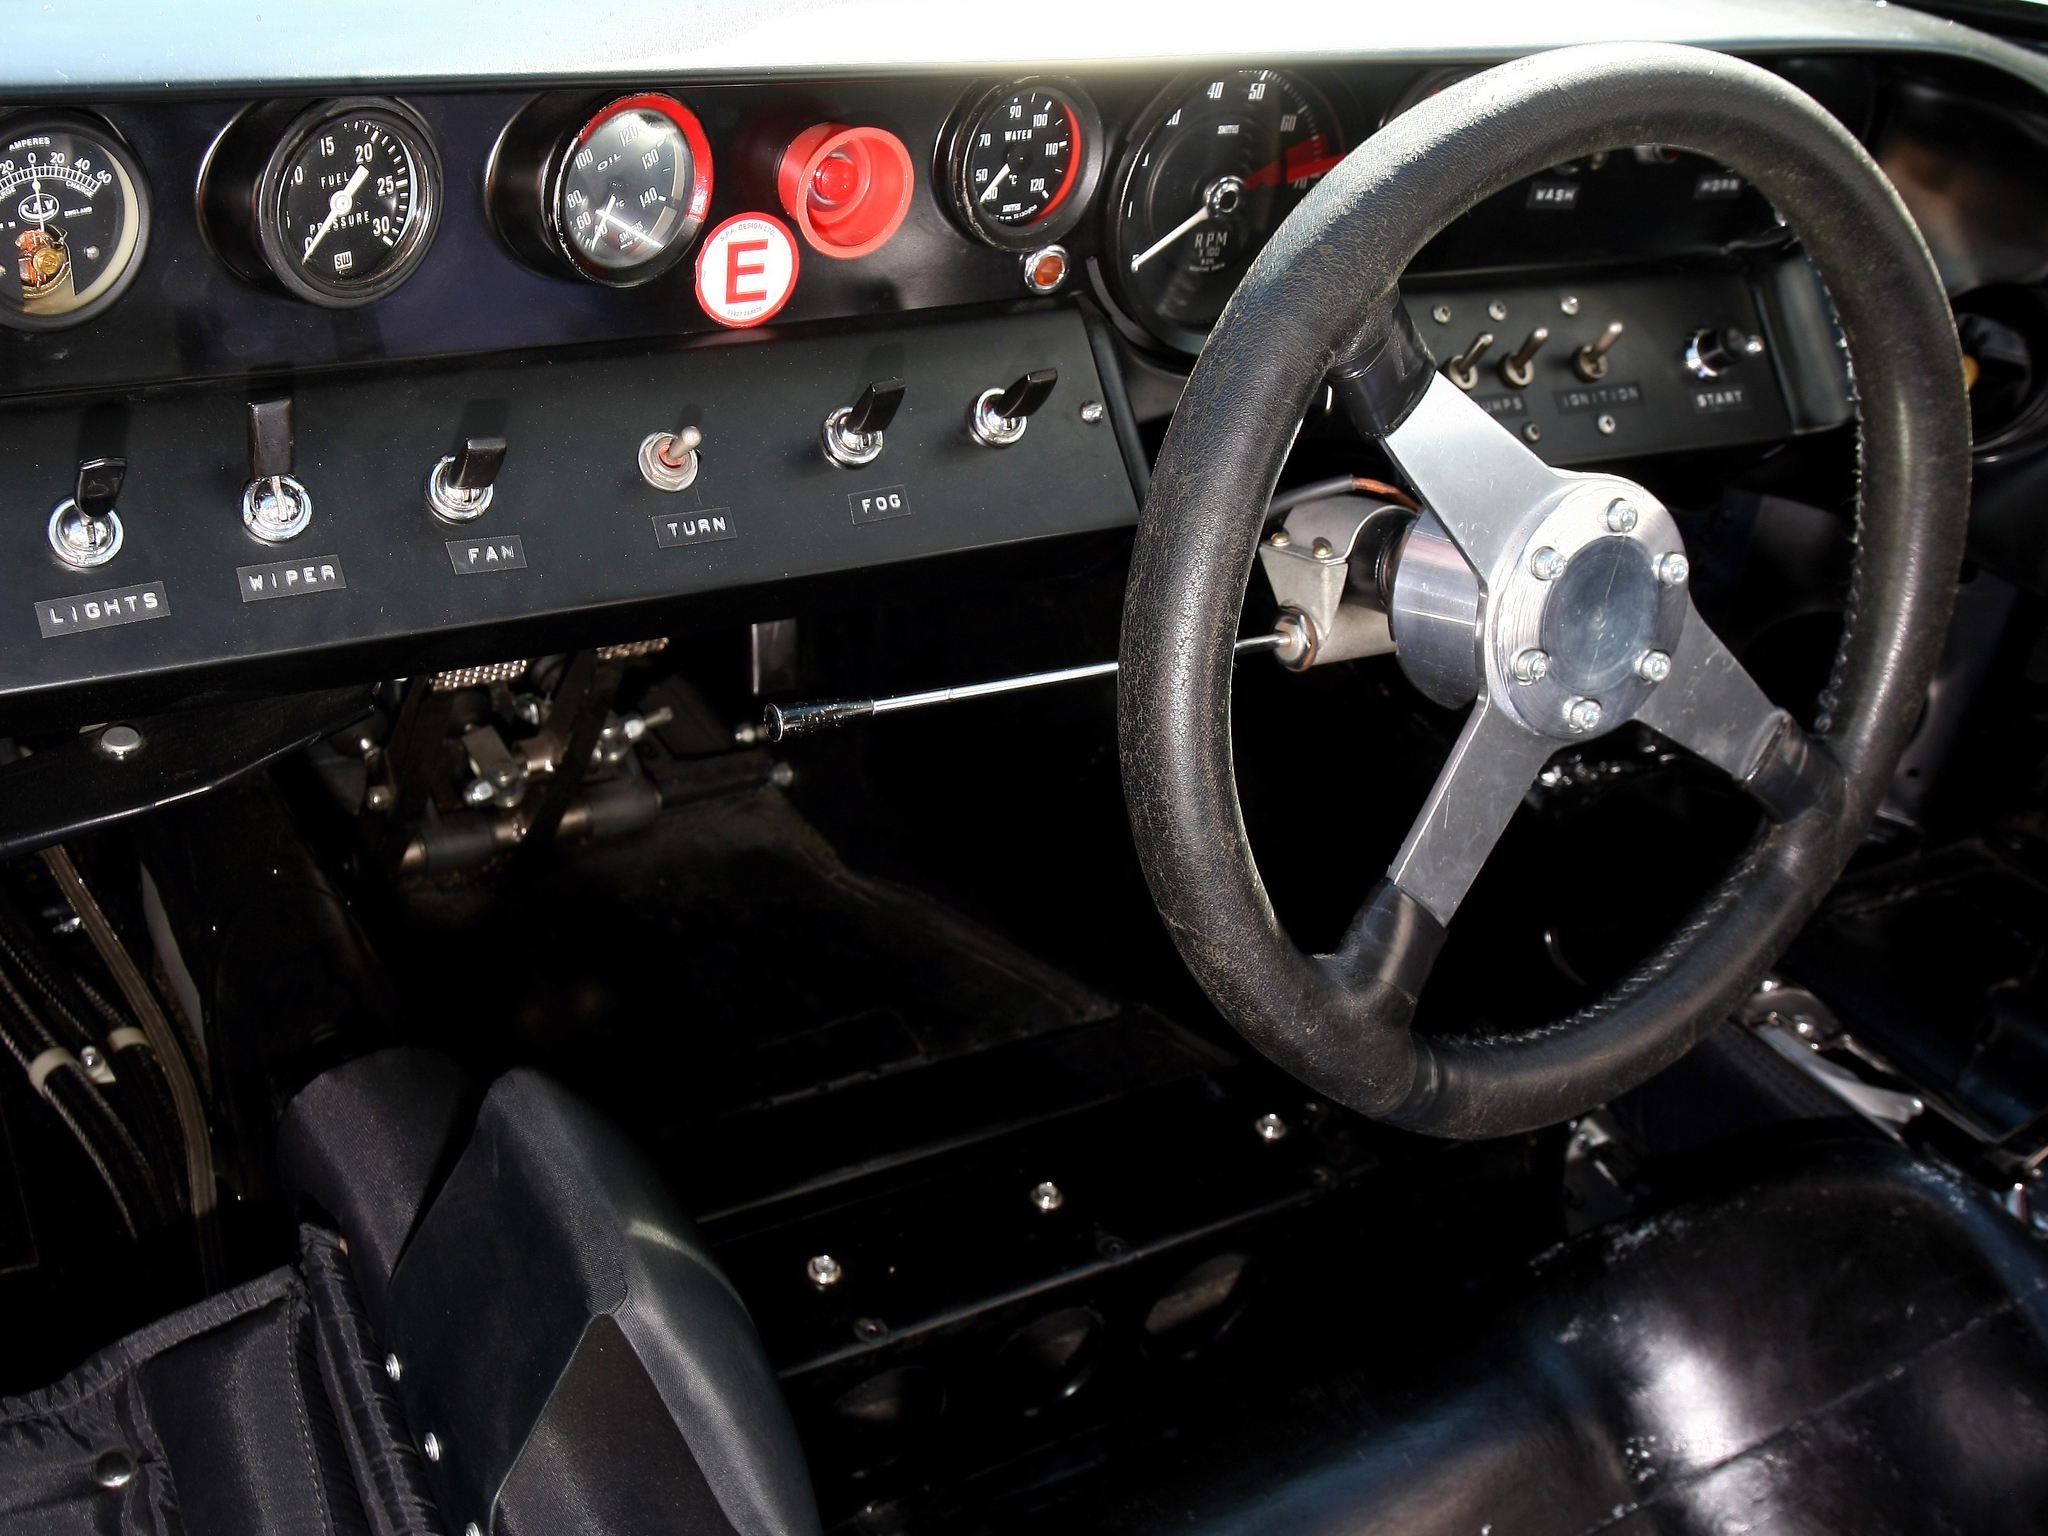 1968, Ford, Gt40, Gulf oil, Le mans, Race, Racing, Supercar, Classic, Interior Wallpaper